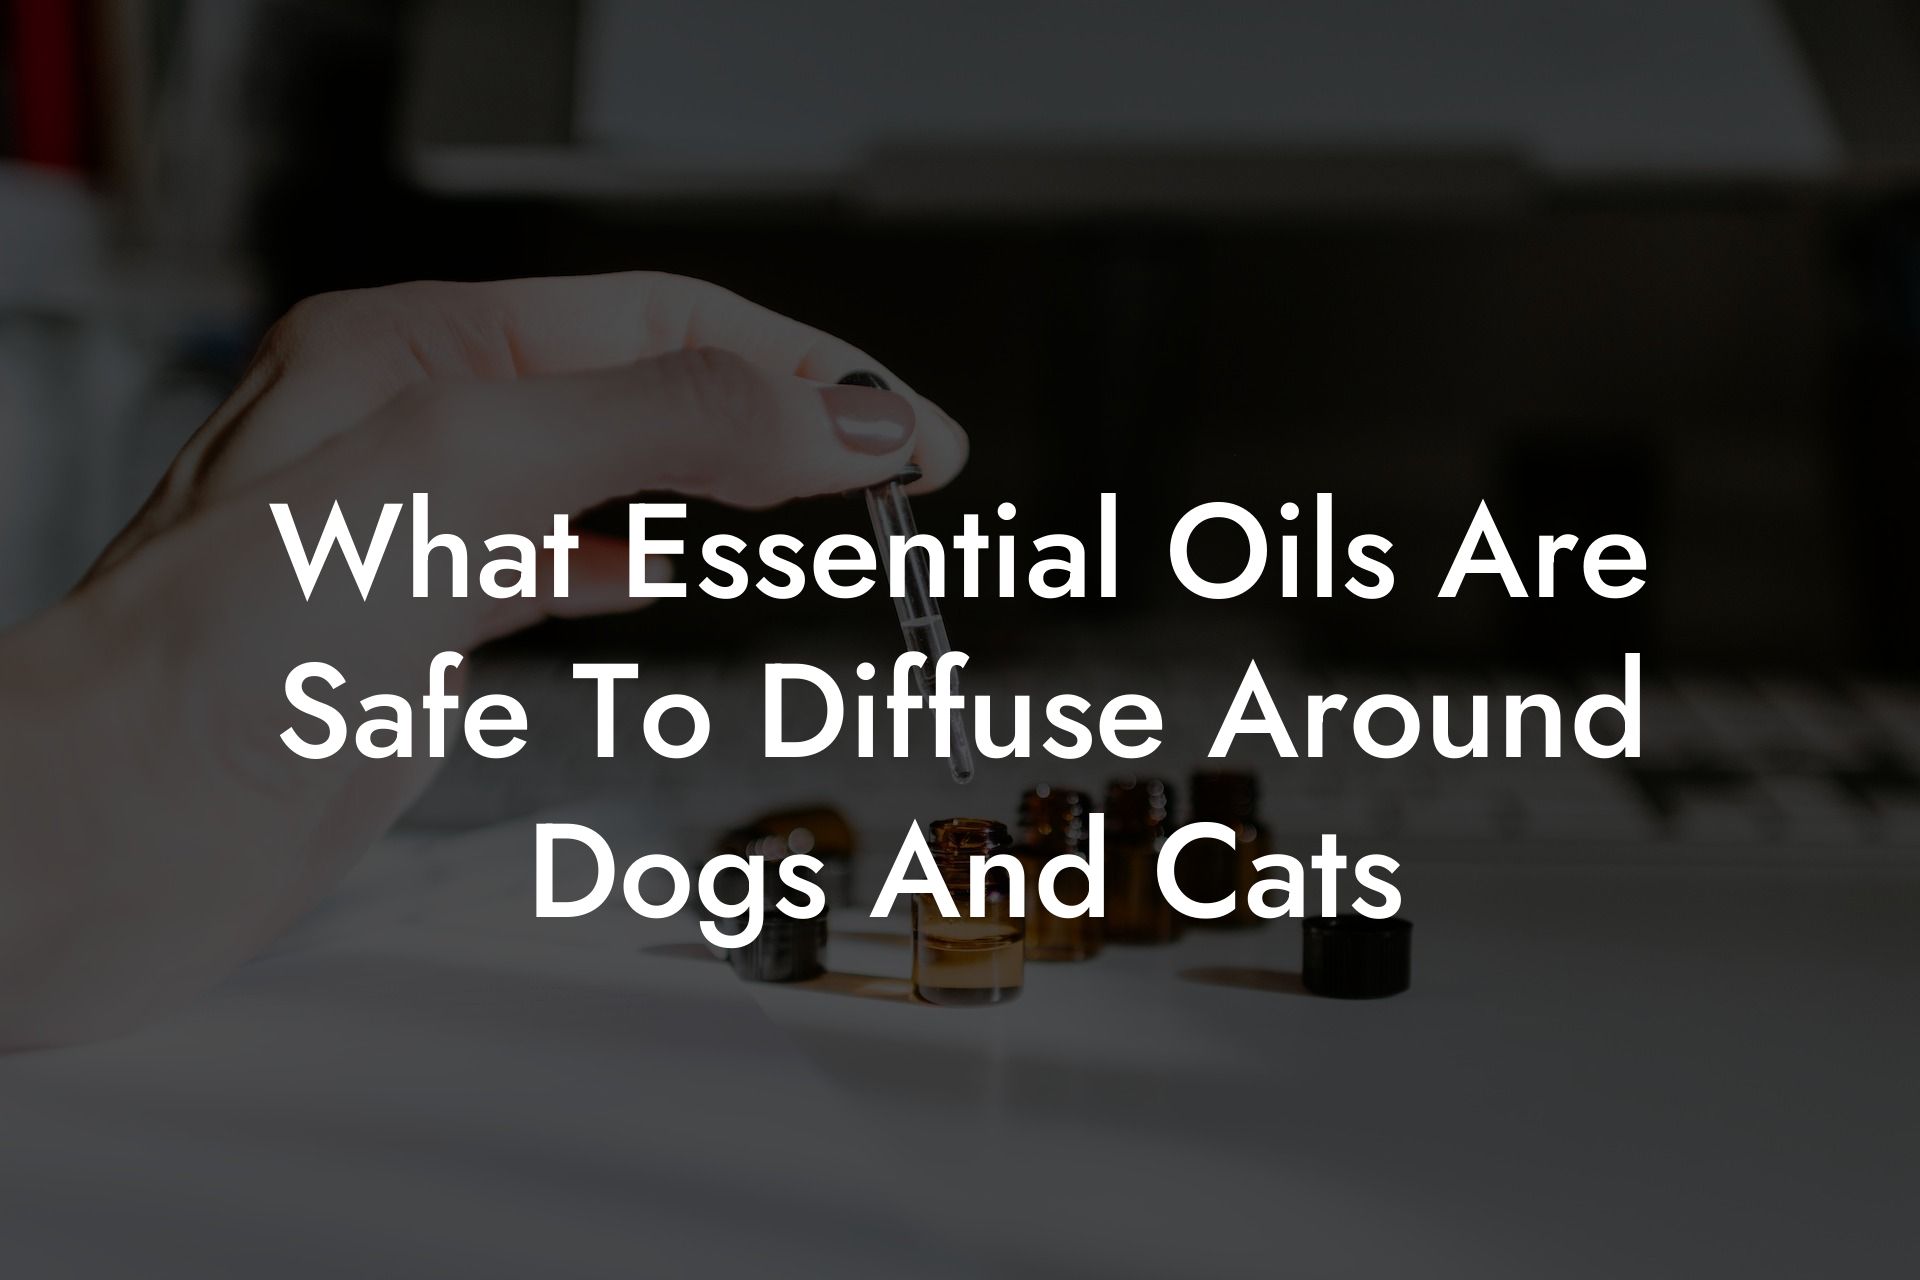 What Essential Oils Are Safe To Diffuse Around Dogs And Cats